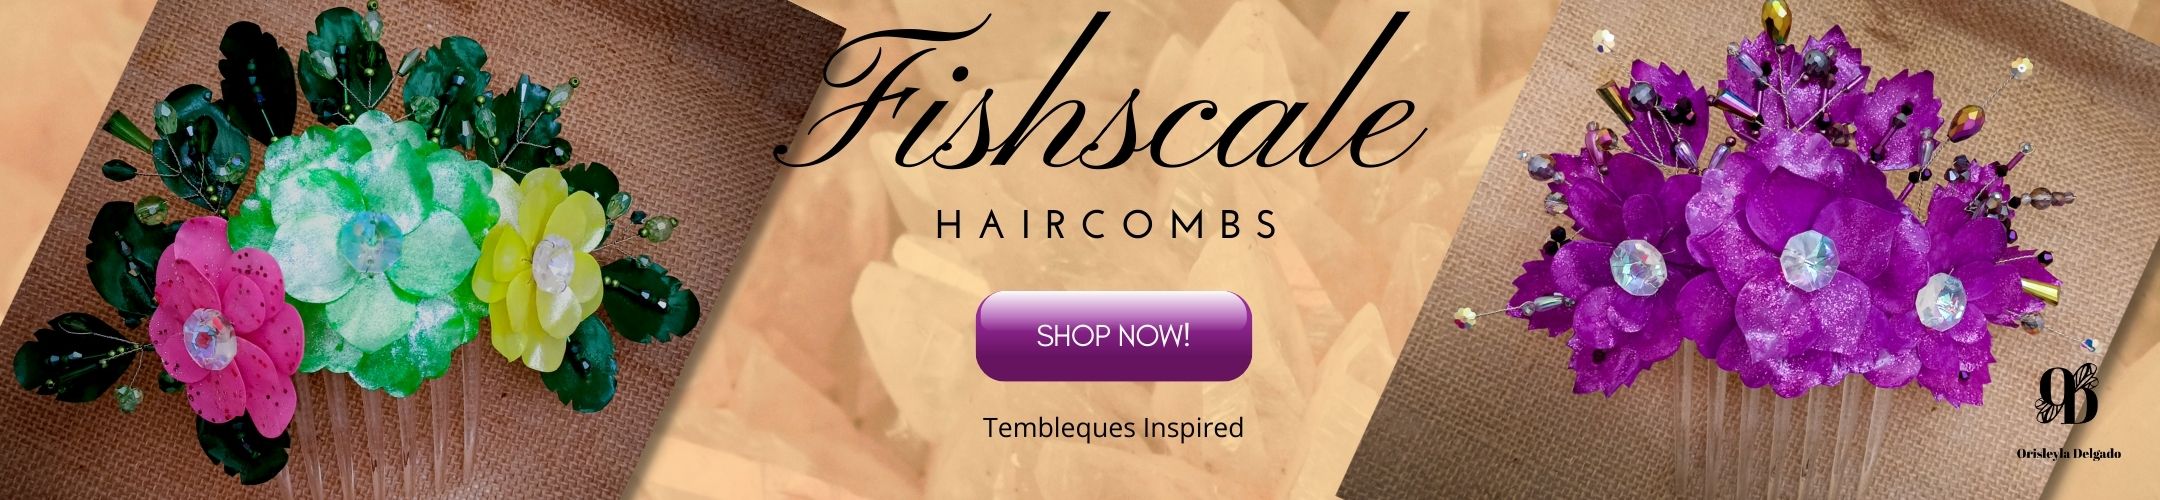 Best fishscale panamanian tembleques haircombs for women